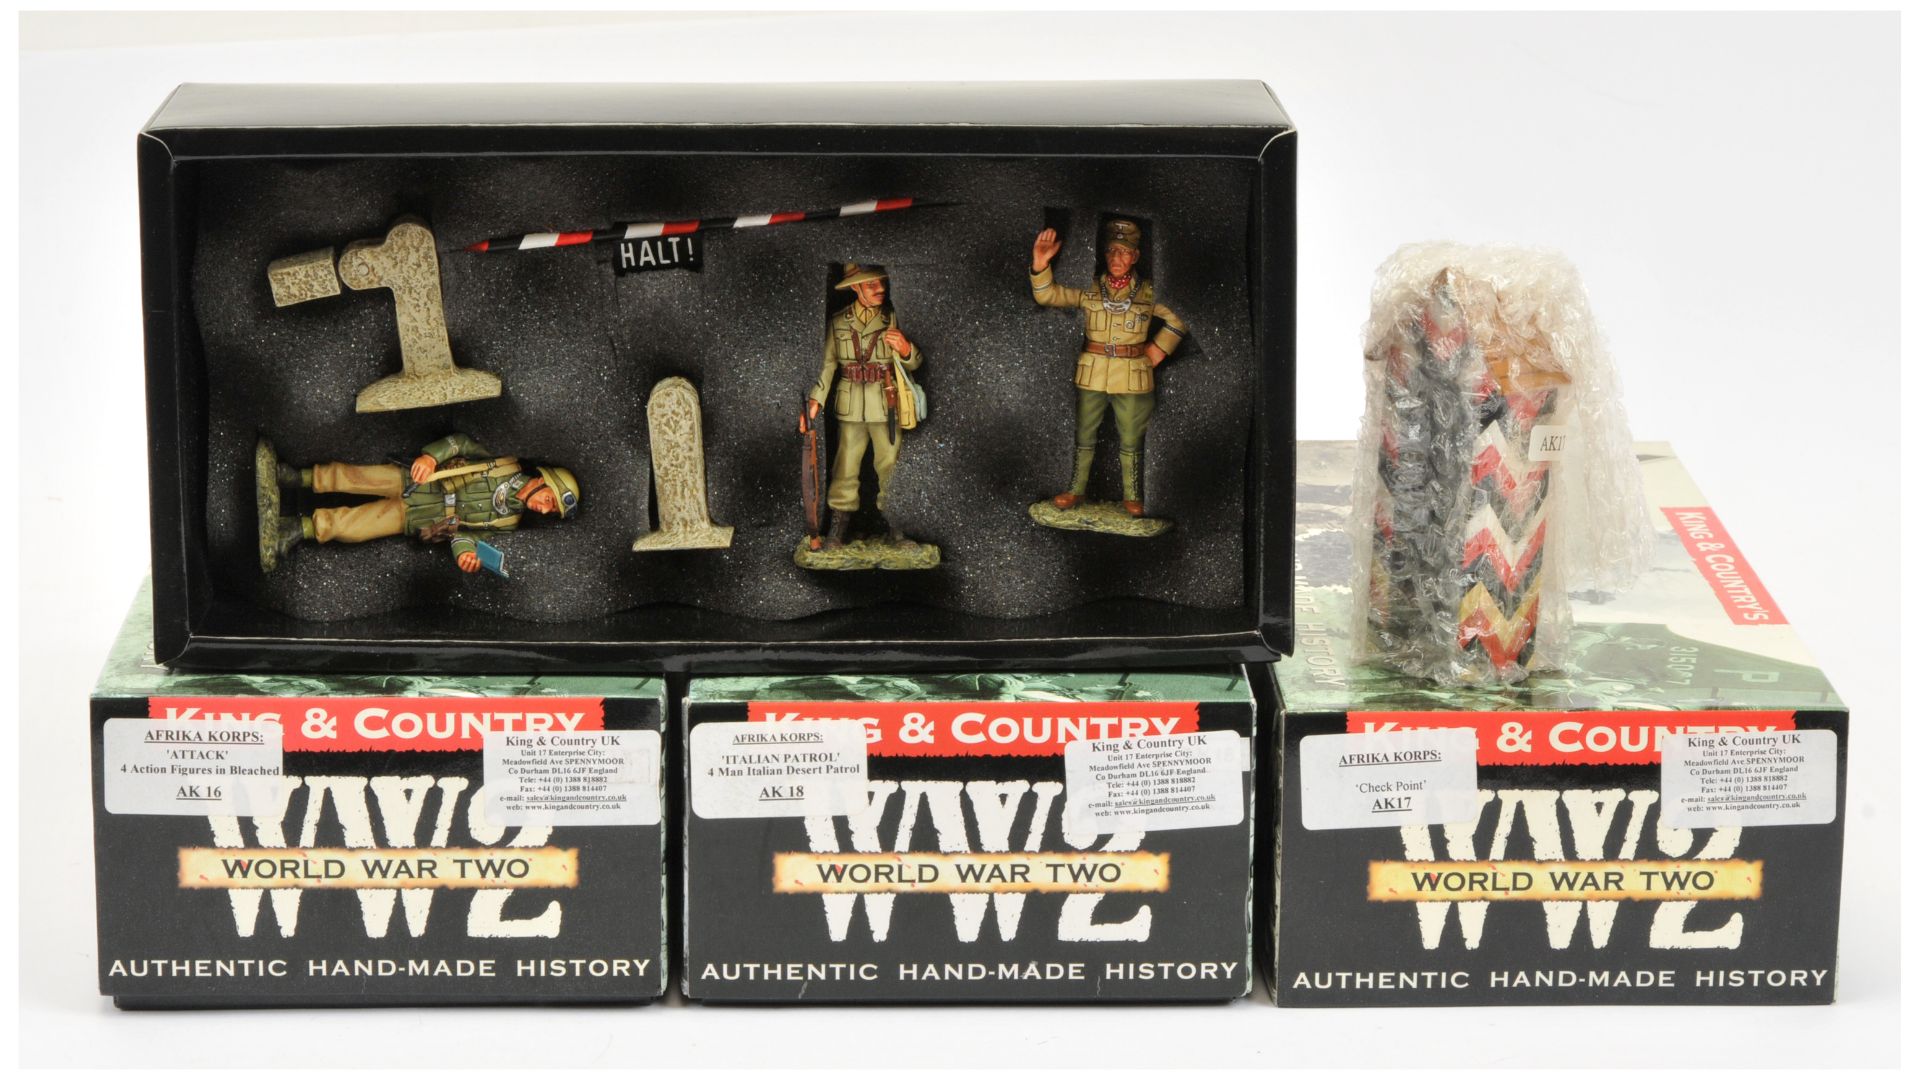 King & Country - 'Afrika Corps' Series.  Comprising Set Nos. AK16 'Attack'